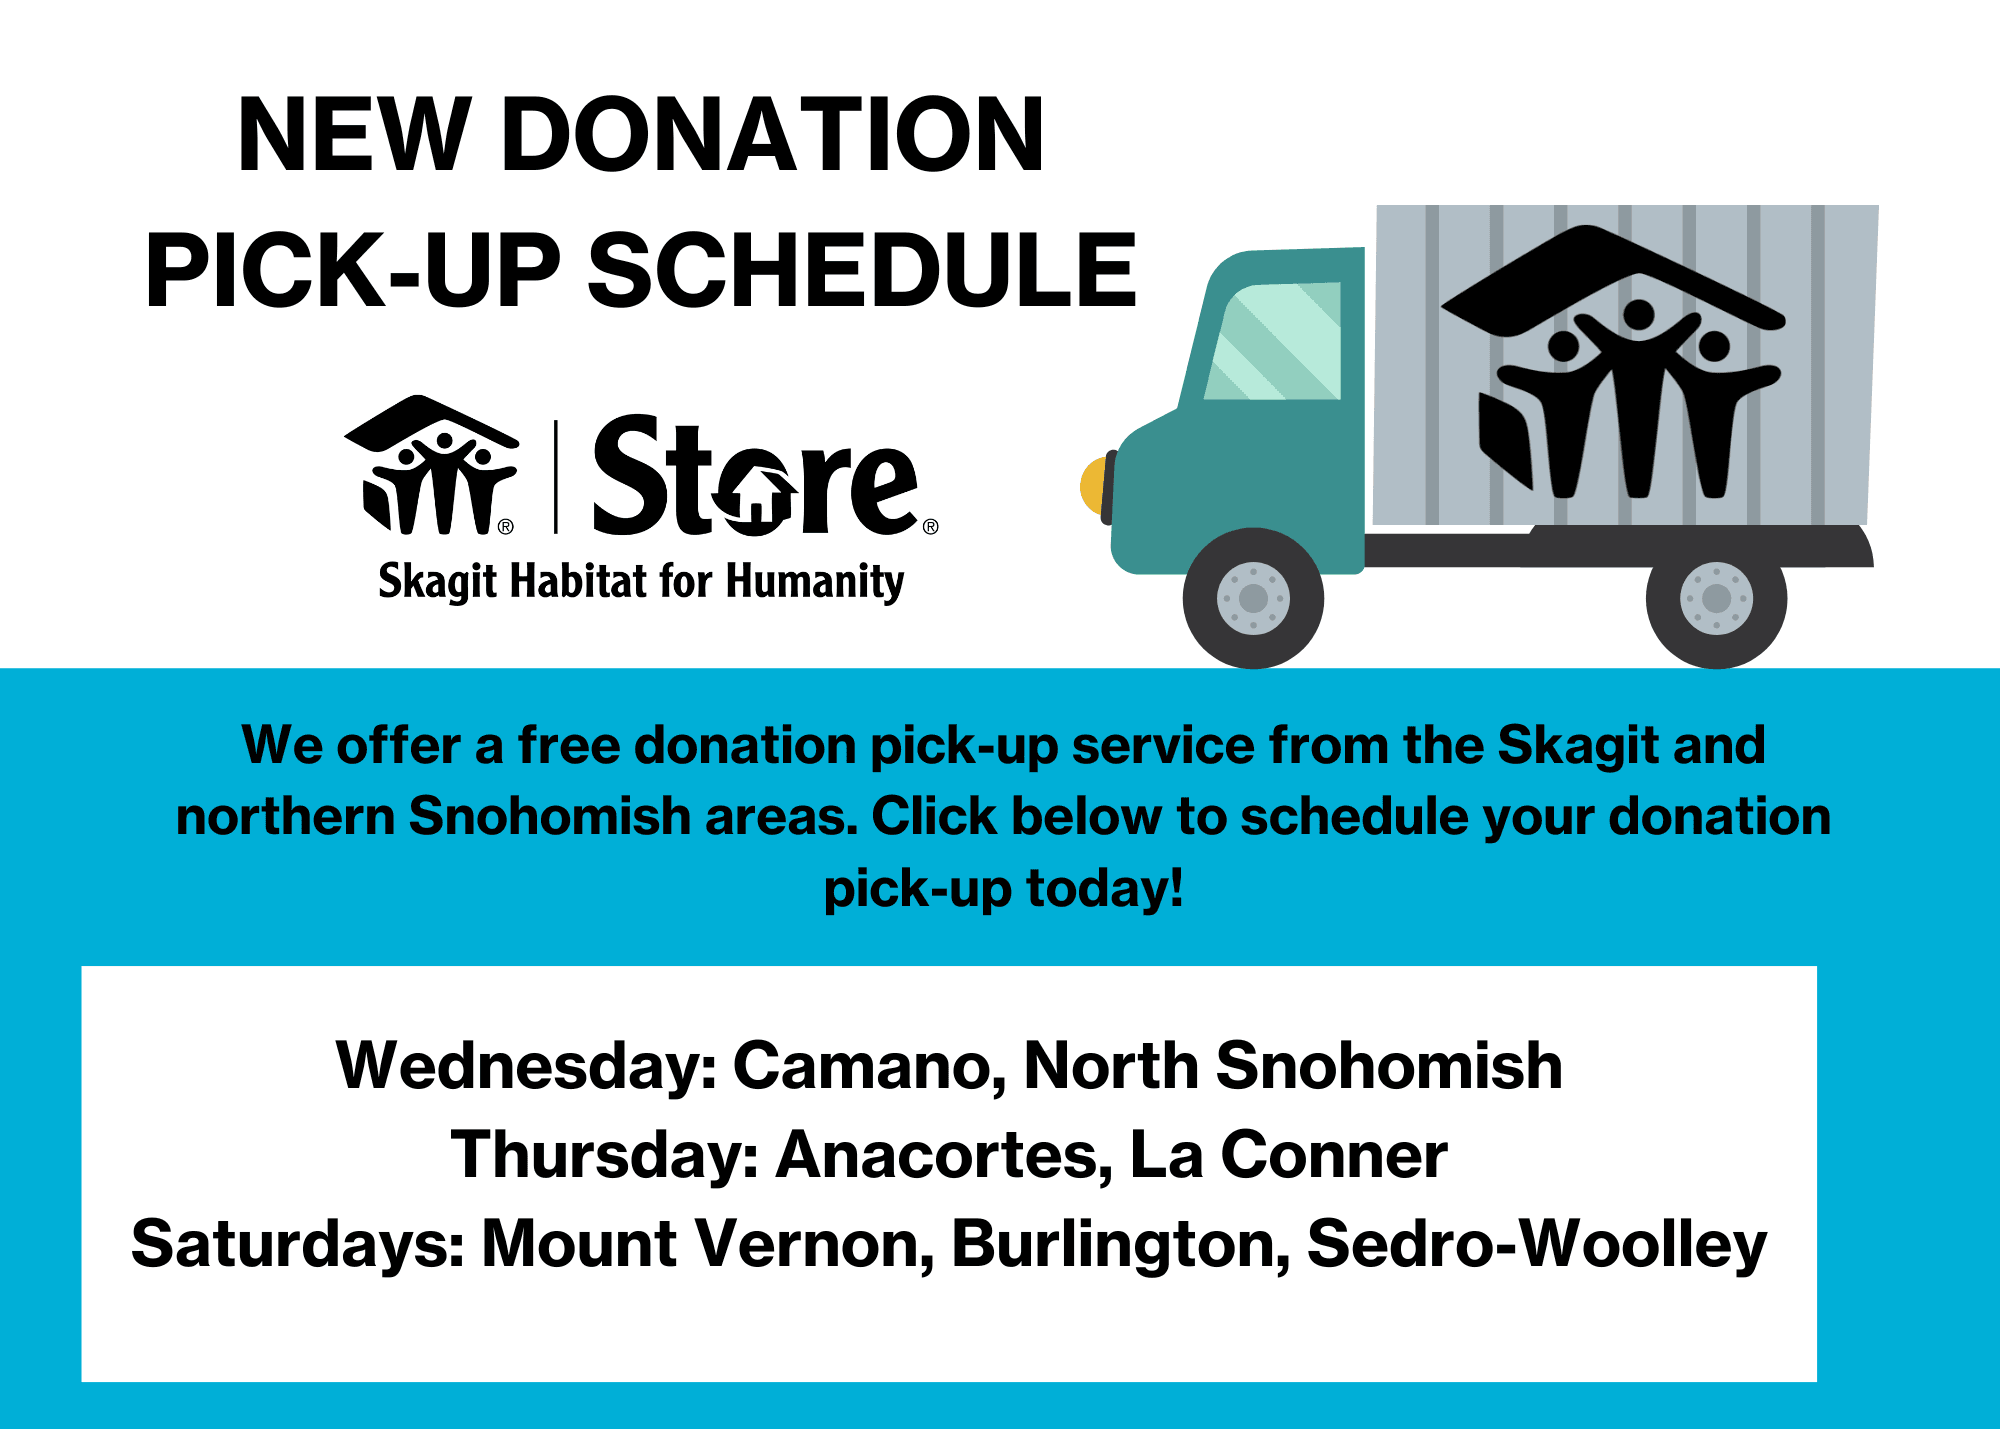 The Skagit Habitat Store offers a free donation pick-up service from businesses and residences in Skagit County, as well as parts of northern Snohomish. Call 360 (428-9402) to schedule your free donation pick-up!